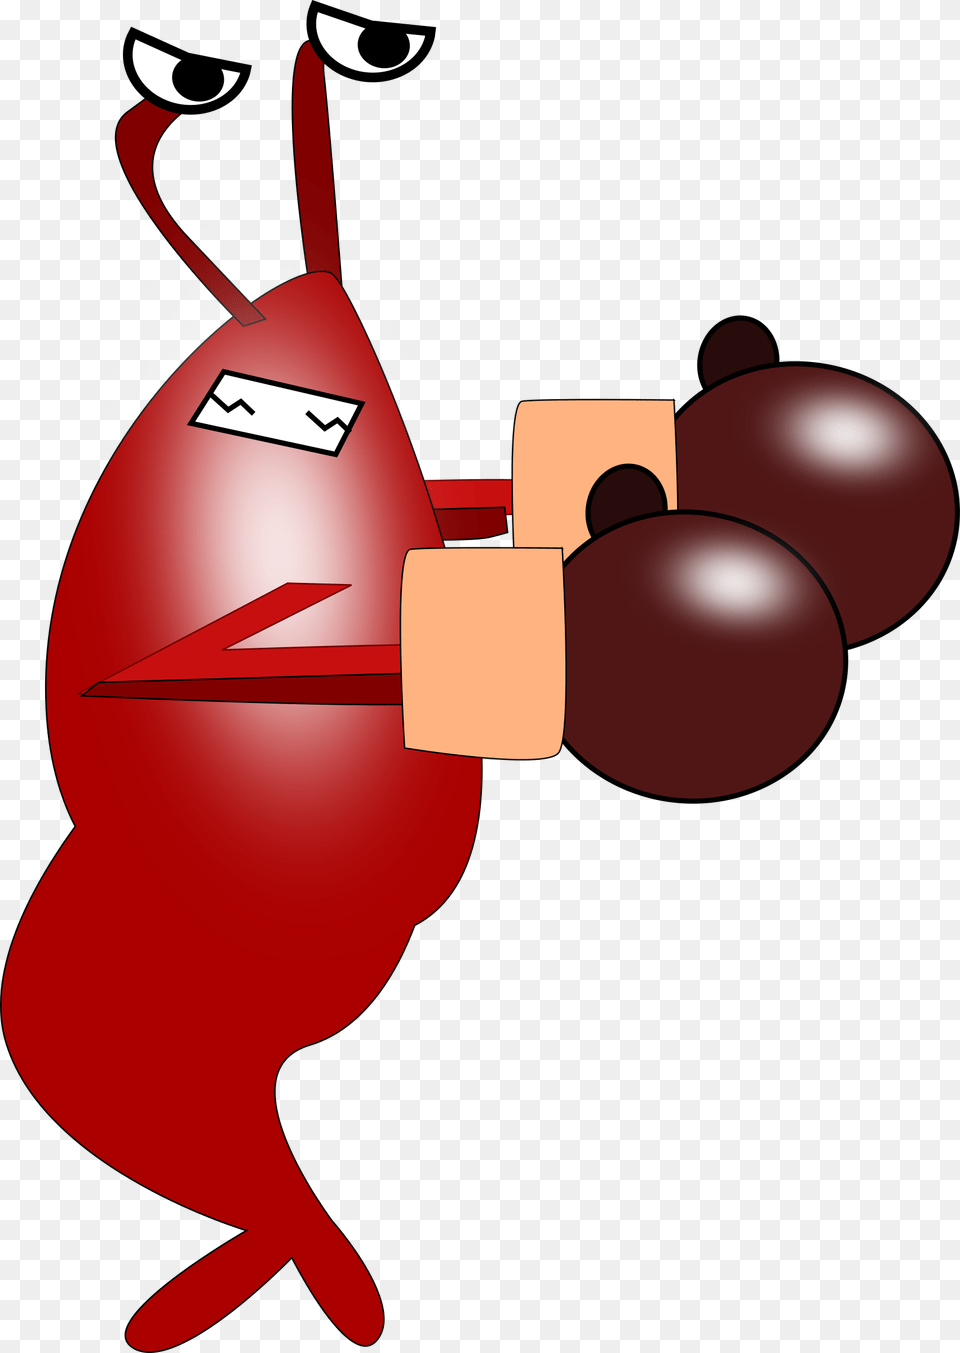 This Icons Design Of Fighting Shrimp, Dynamite, Weapon Png Image